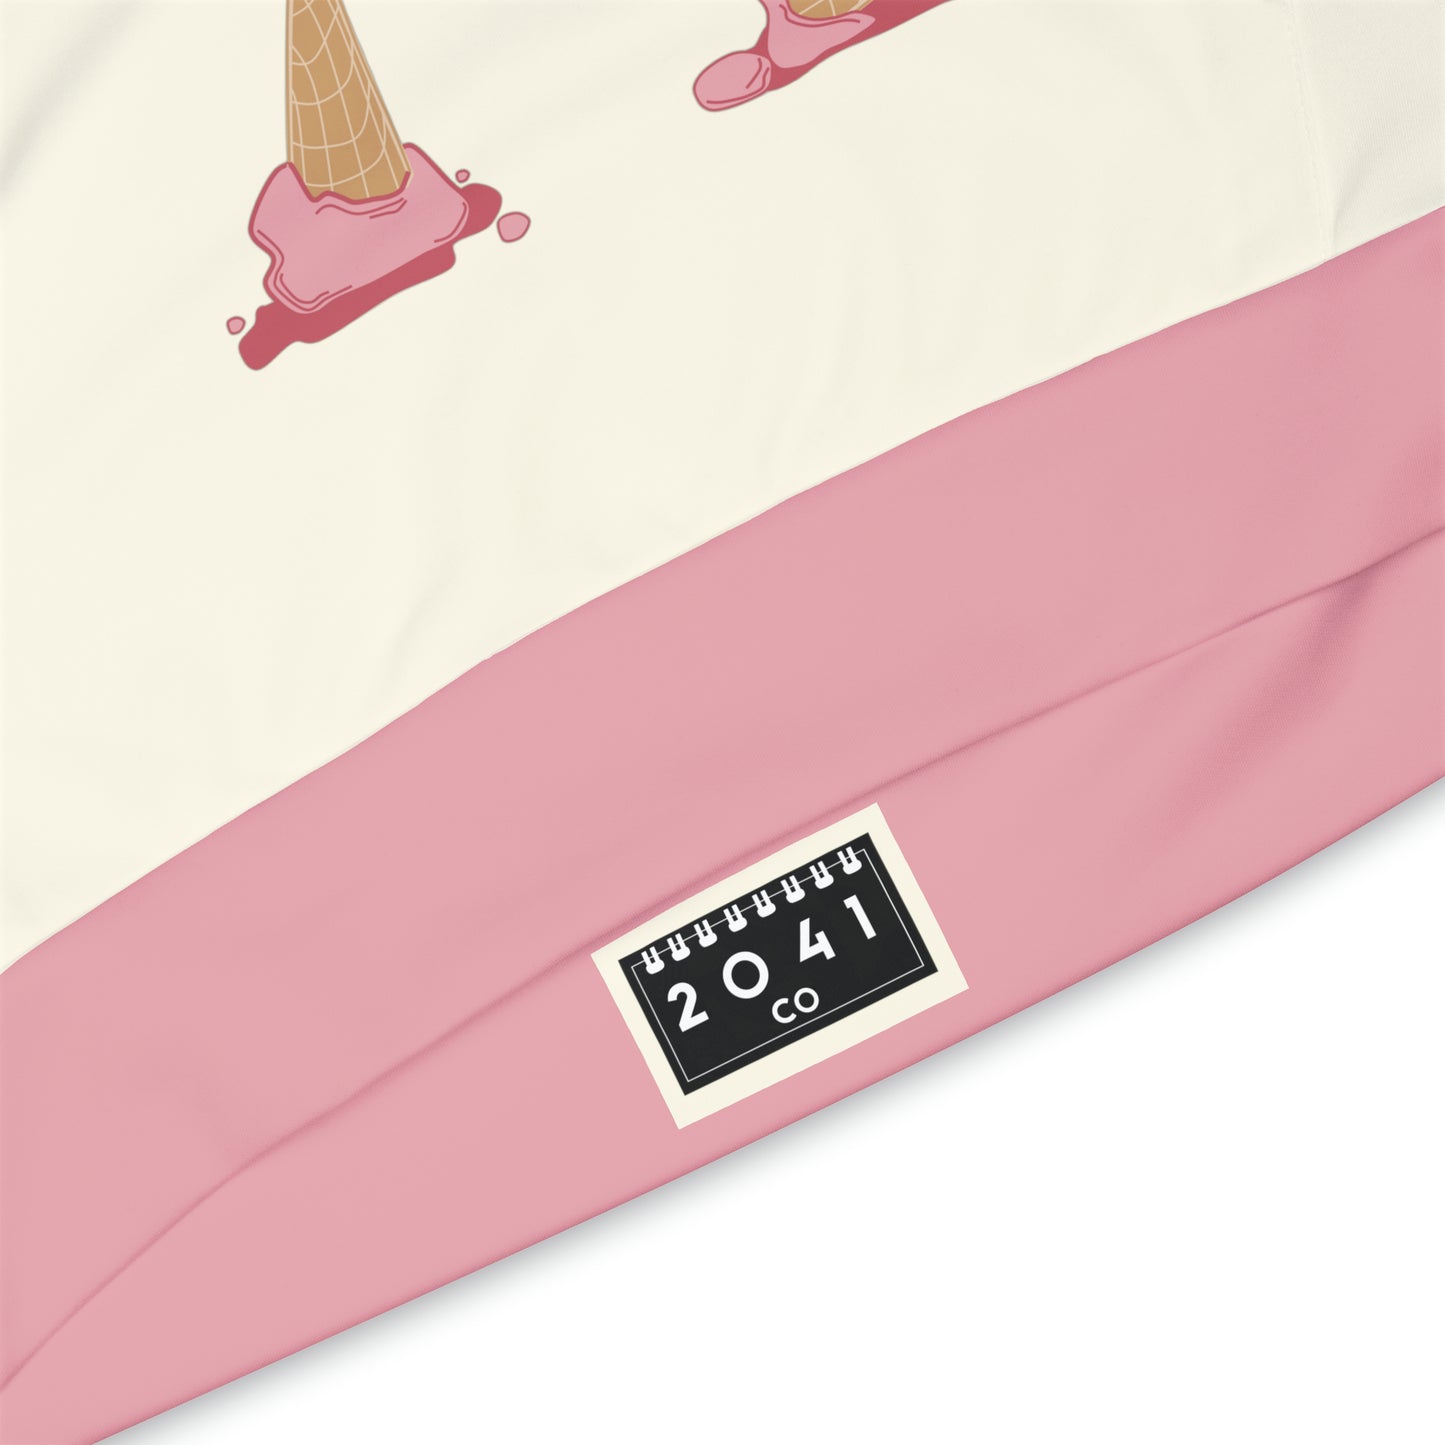 2041 CO ADULT HOODIE ICE CREAM | STRAWBERRY - 2041co